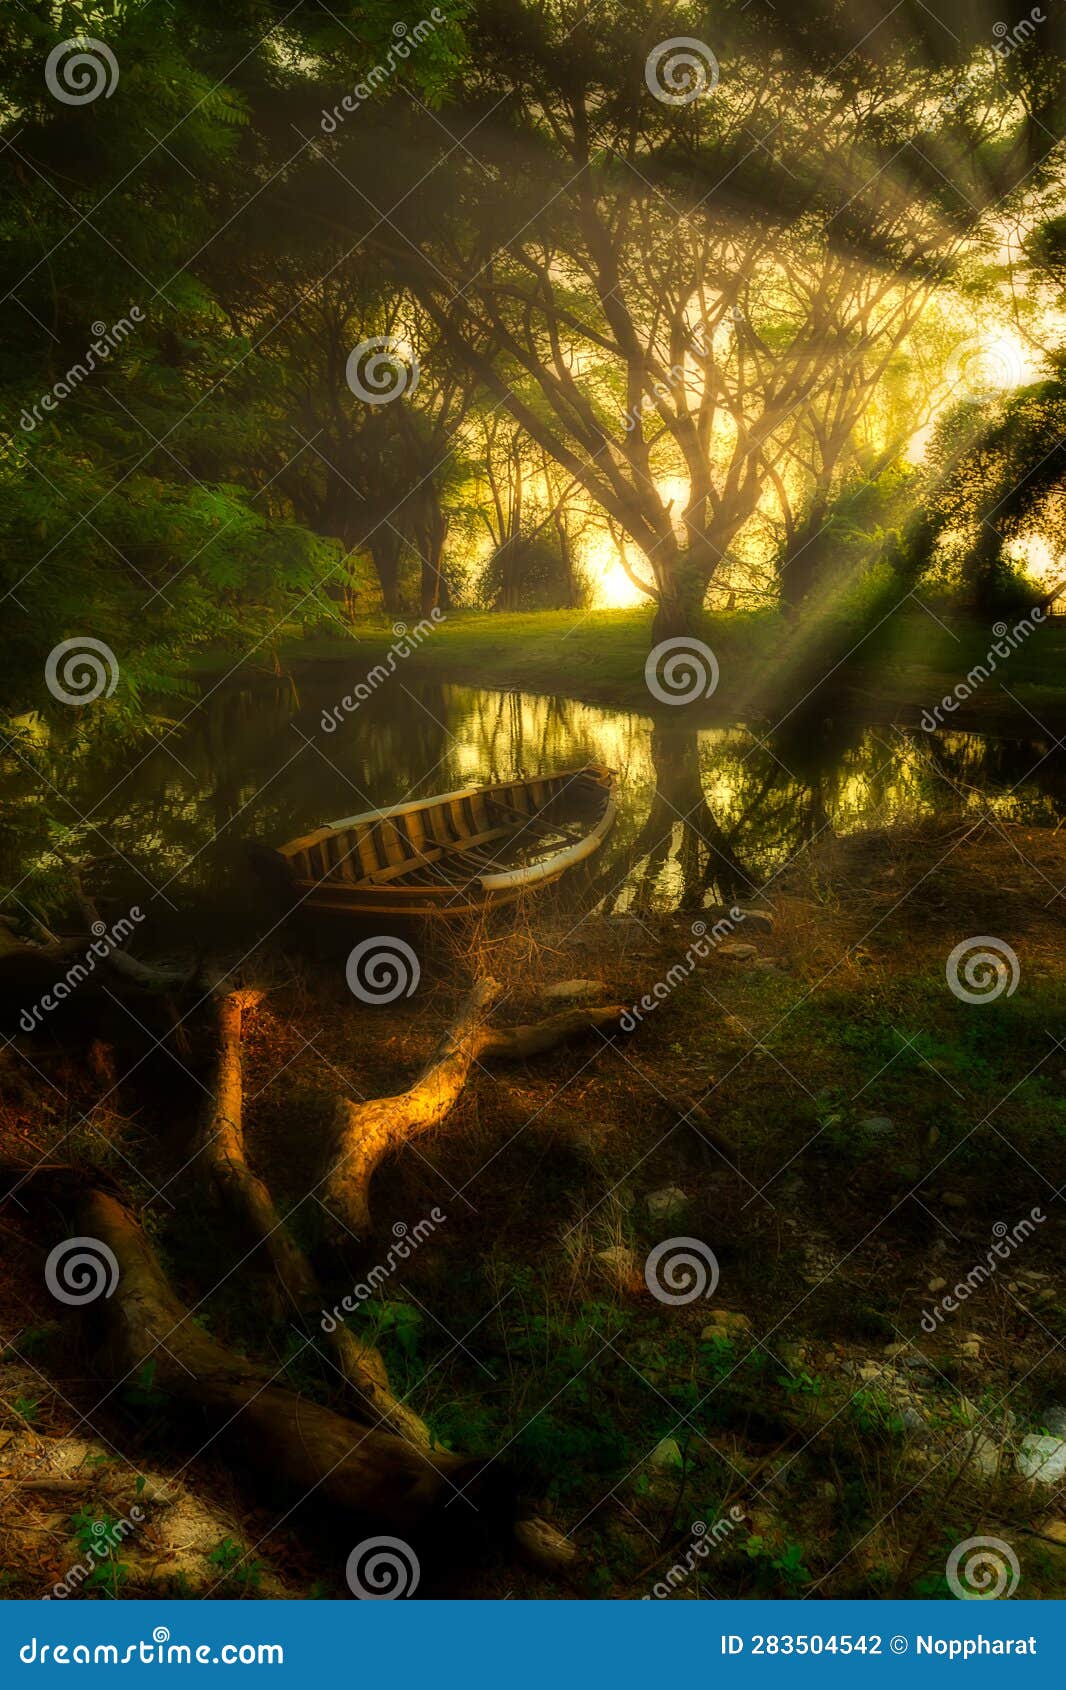 olds fishing boat in the dark forest